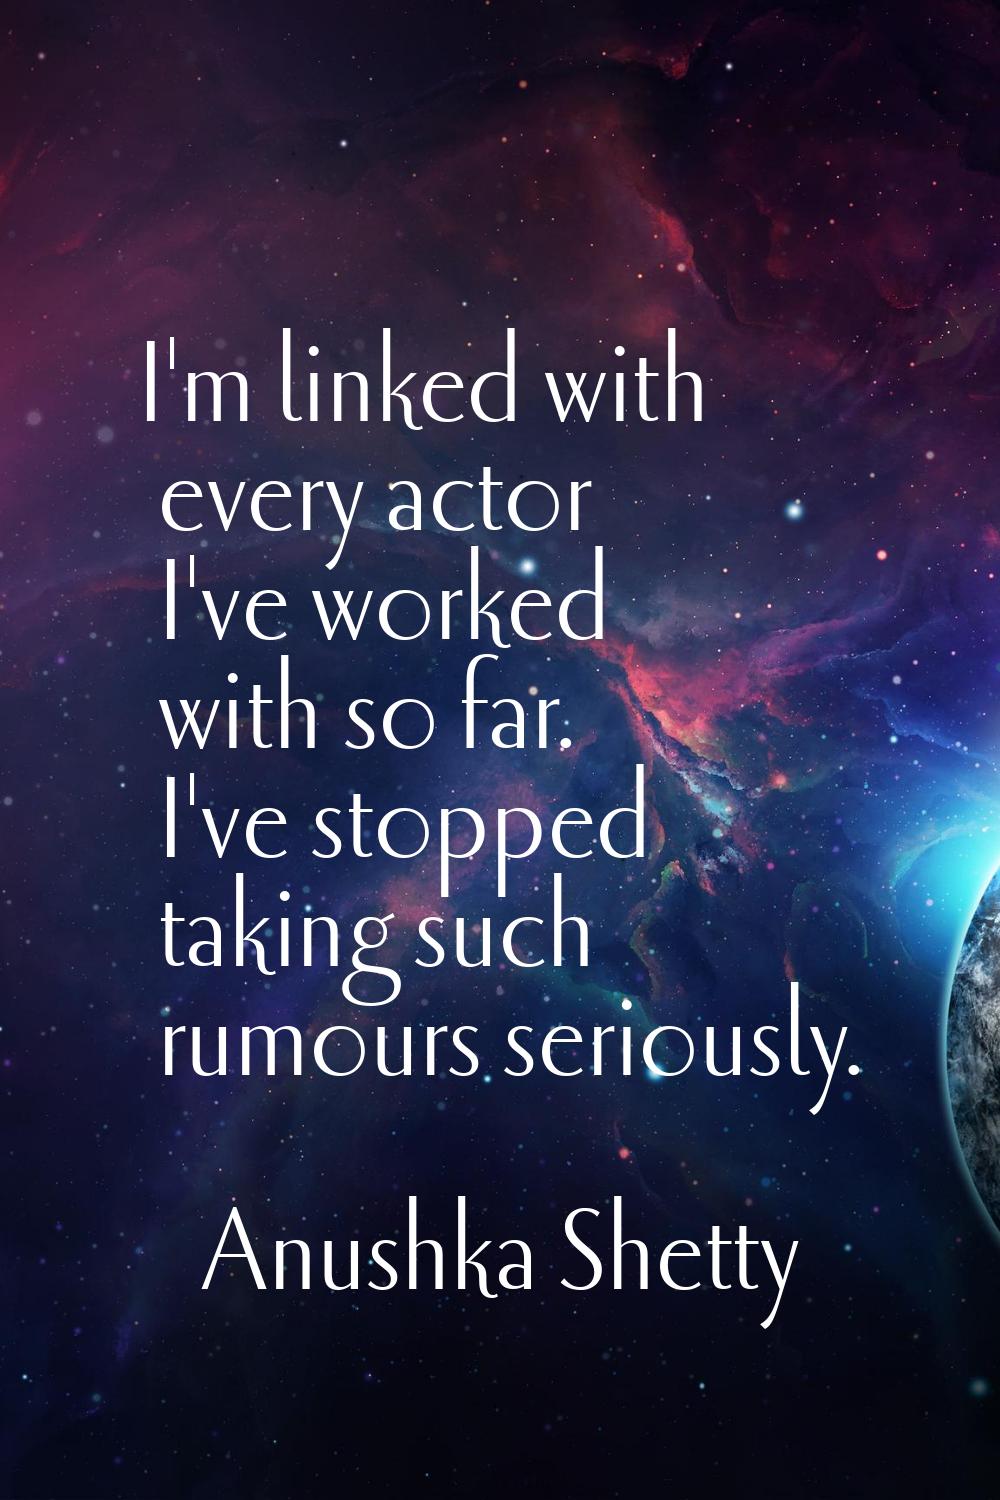 I'm linked with every actor I've worked with so far. I've stopped taking such rumours seriously.